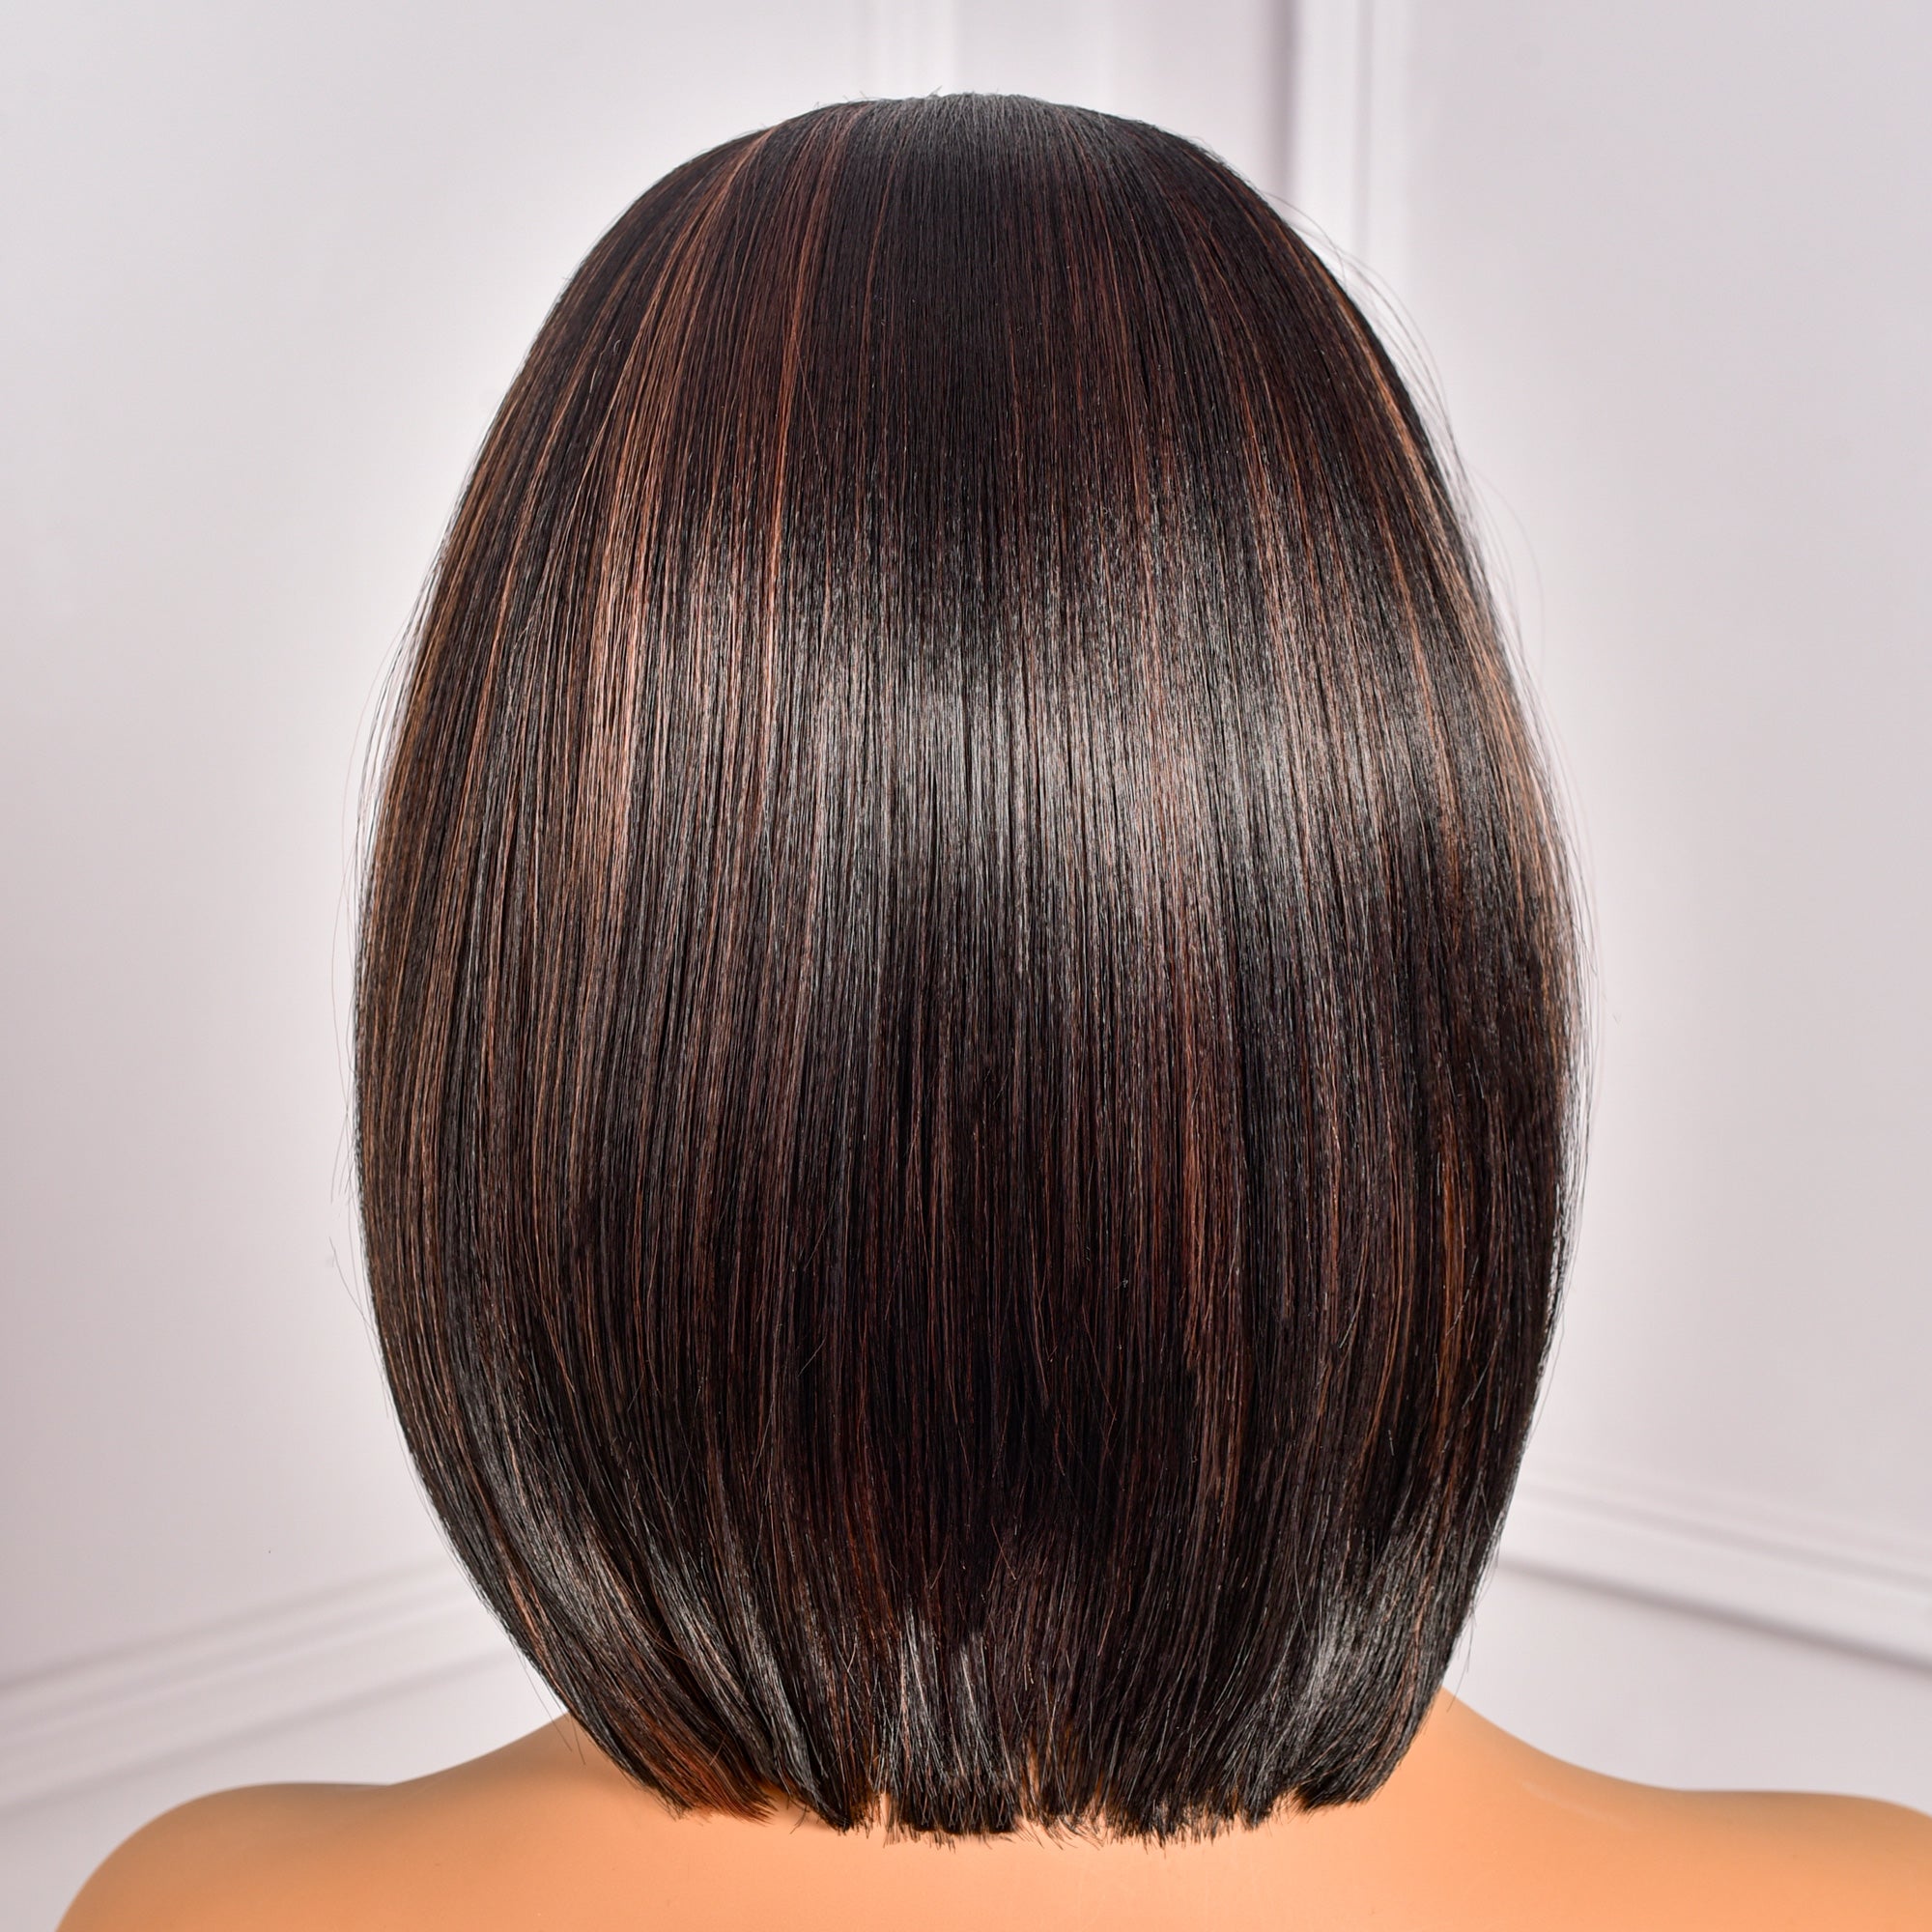 Toyotress Short Bob Synthetic Wigs | Blunt cut Natural Black Straight Wig with Bangs Synthetic Wig（612H+618）